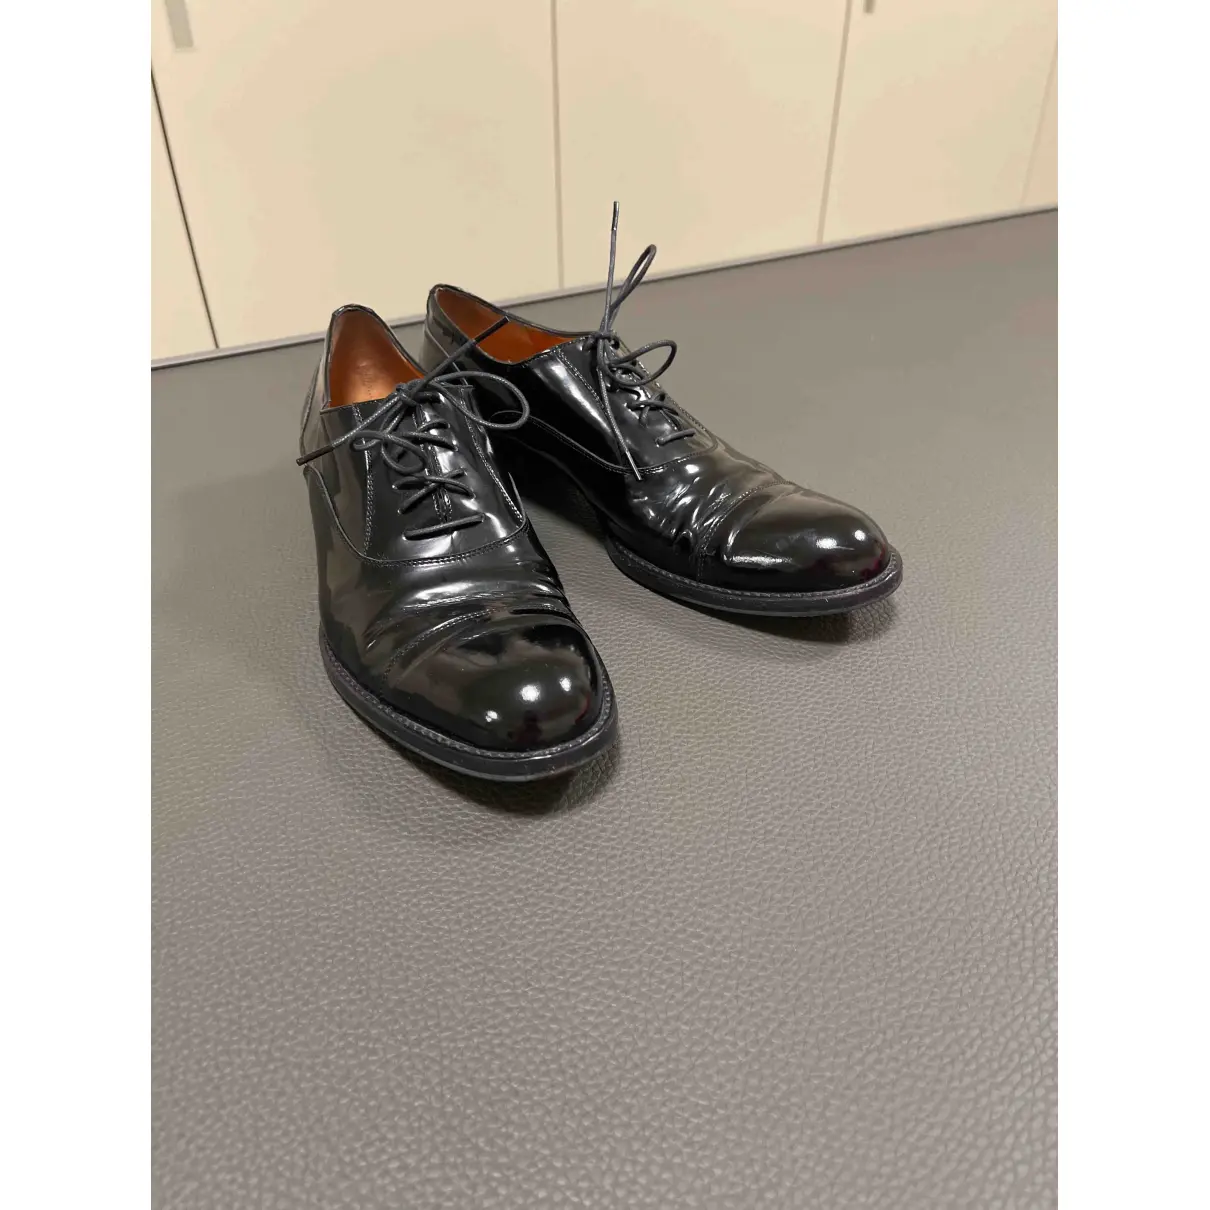 Buy Fratelli Rossetti Patent leather lace ups online